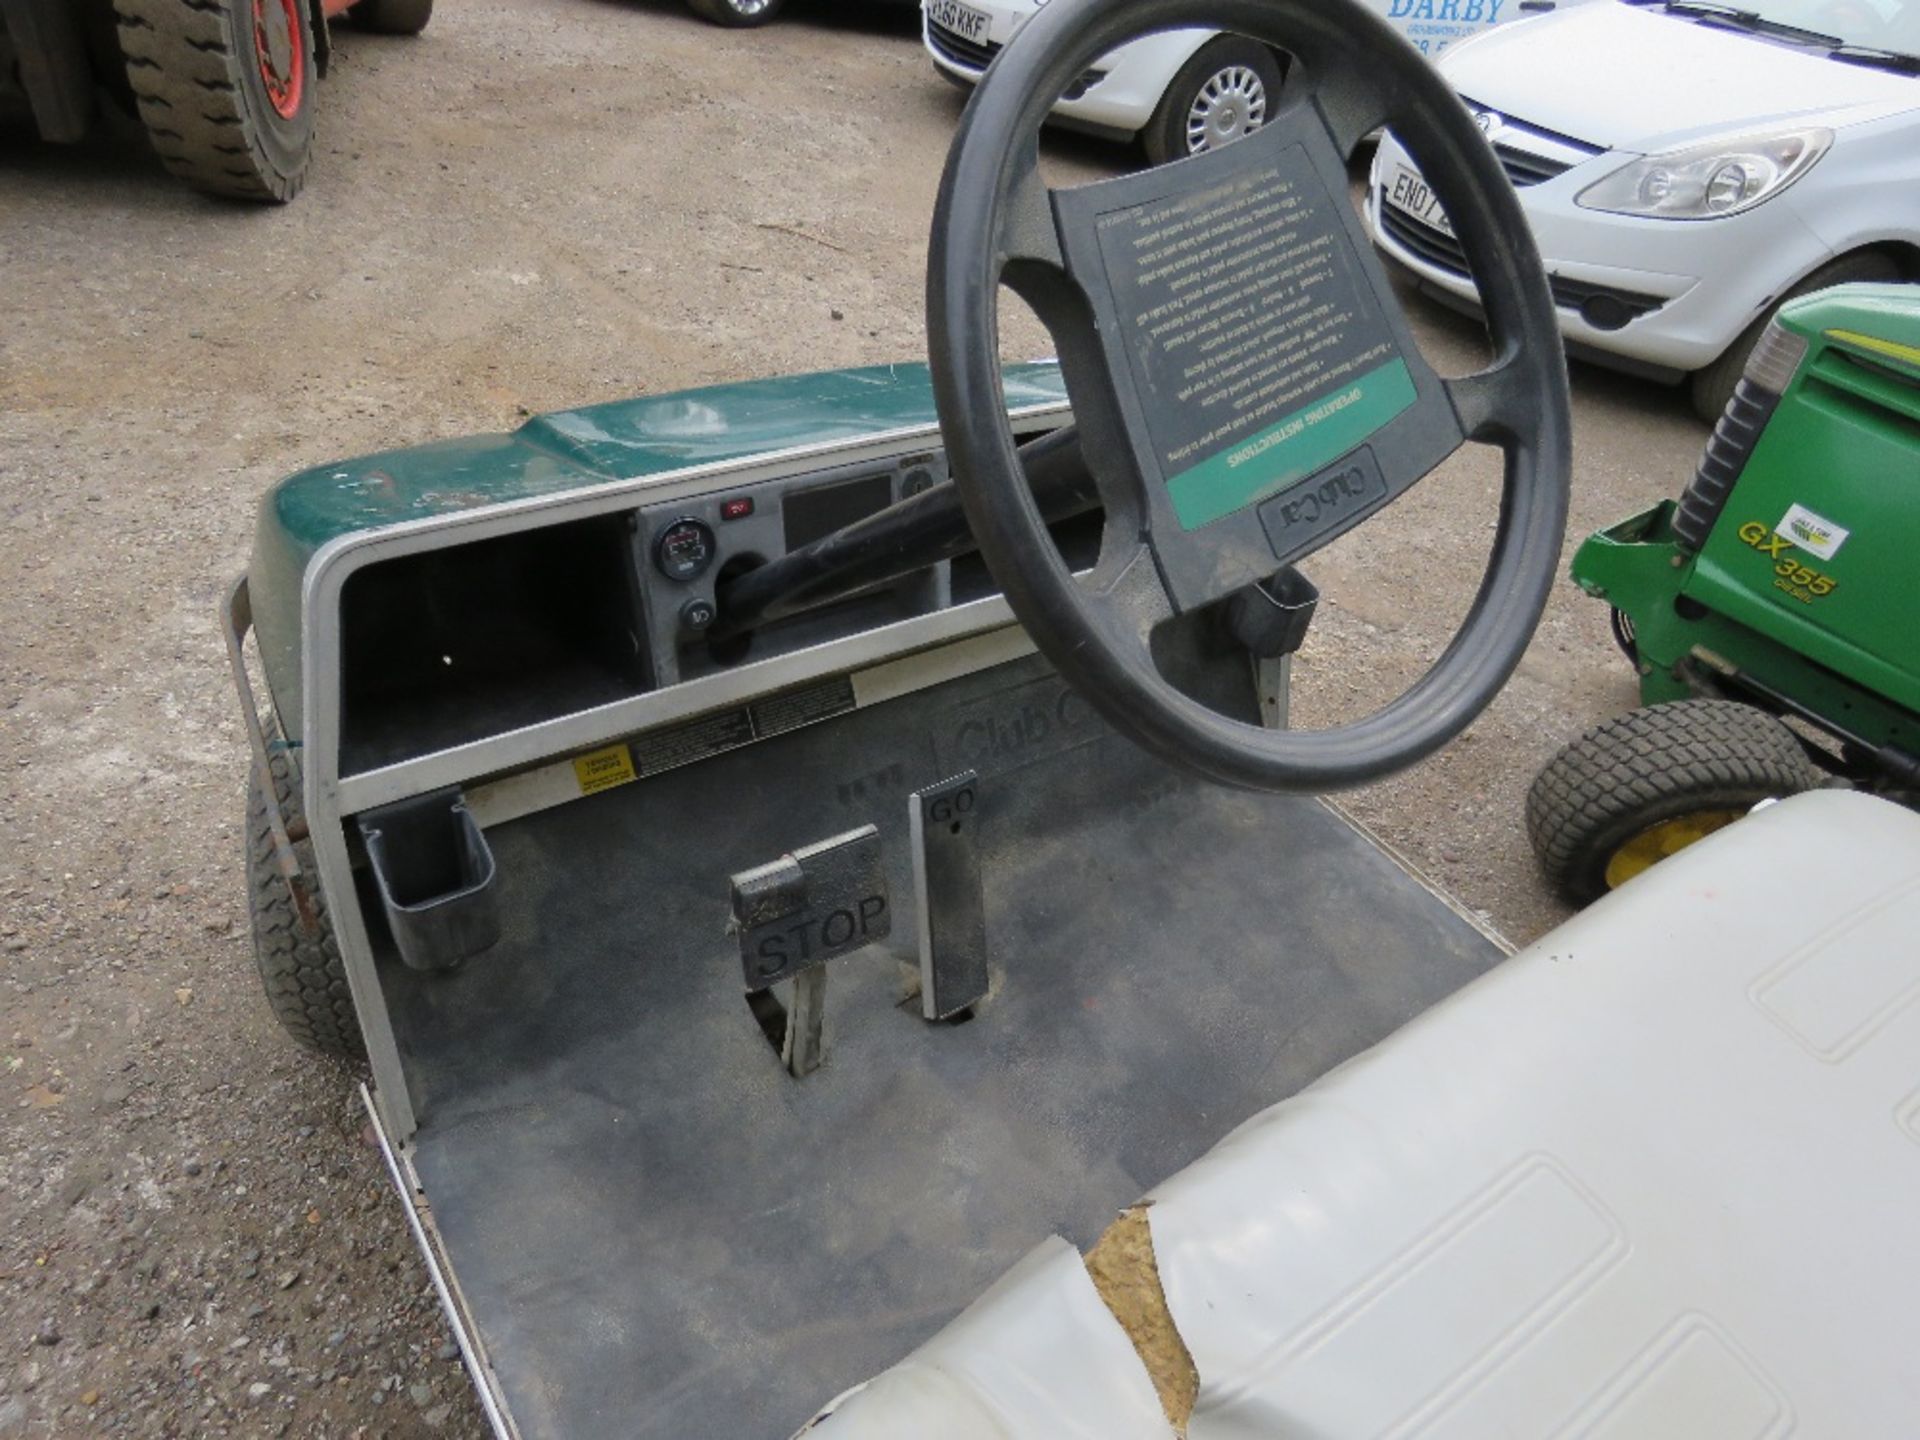 CLUBCAR CARRYALL PETROL UTILITY TRUCK. WHEN TESTED WAS SEEN TO DRIVE, STEER AND BRAKE, - Image 5 of 5